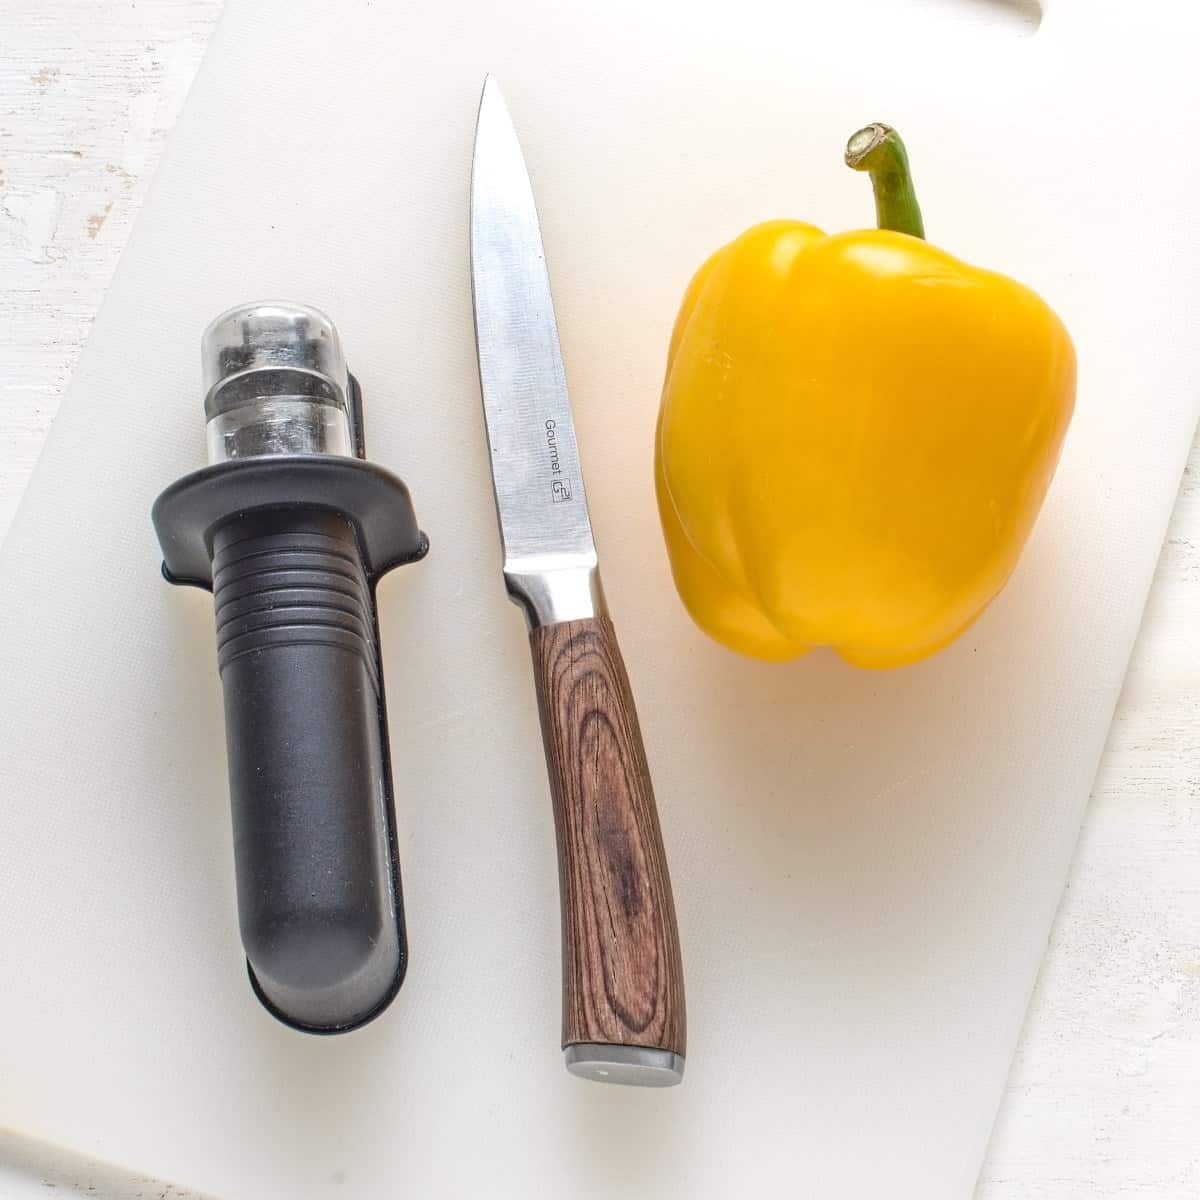 Kitchen tools needed to cut a bell pepper.